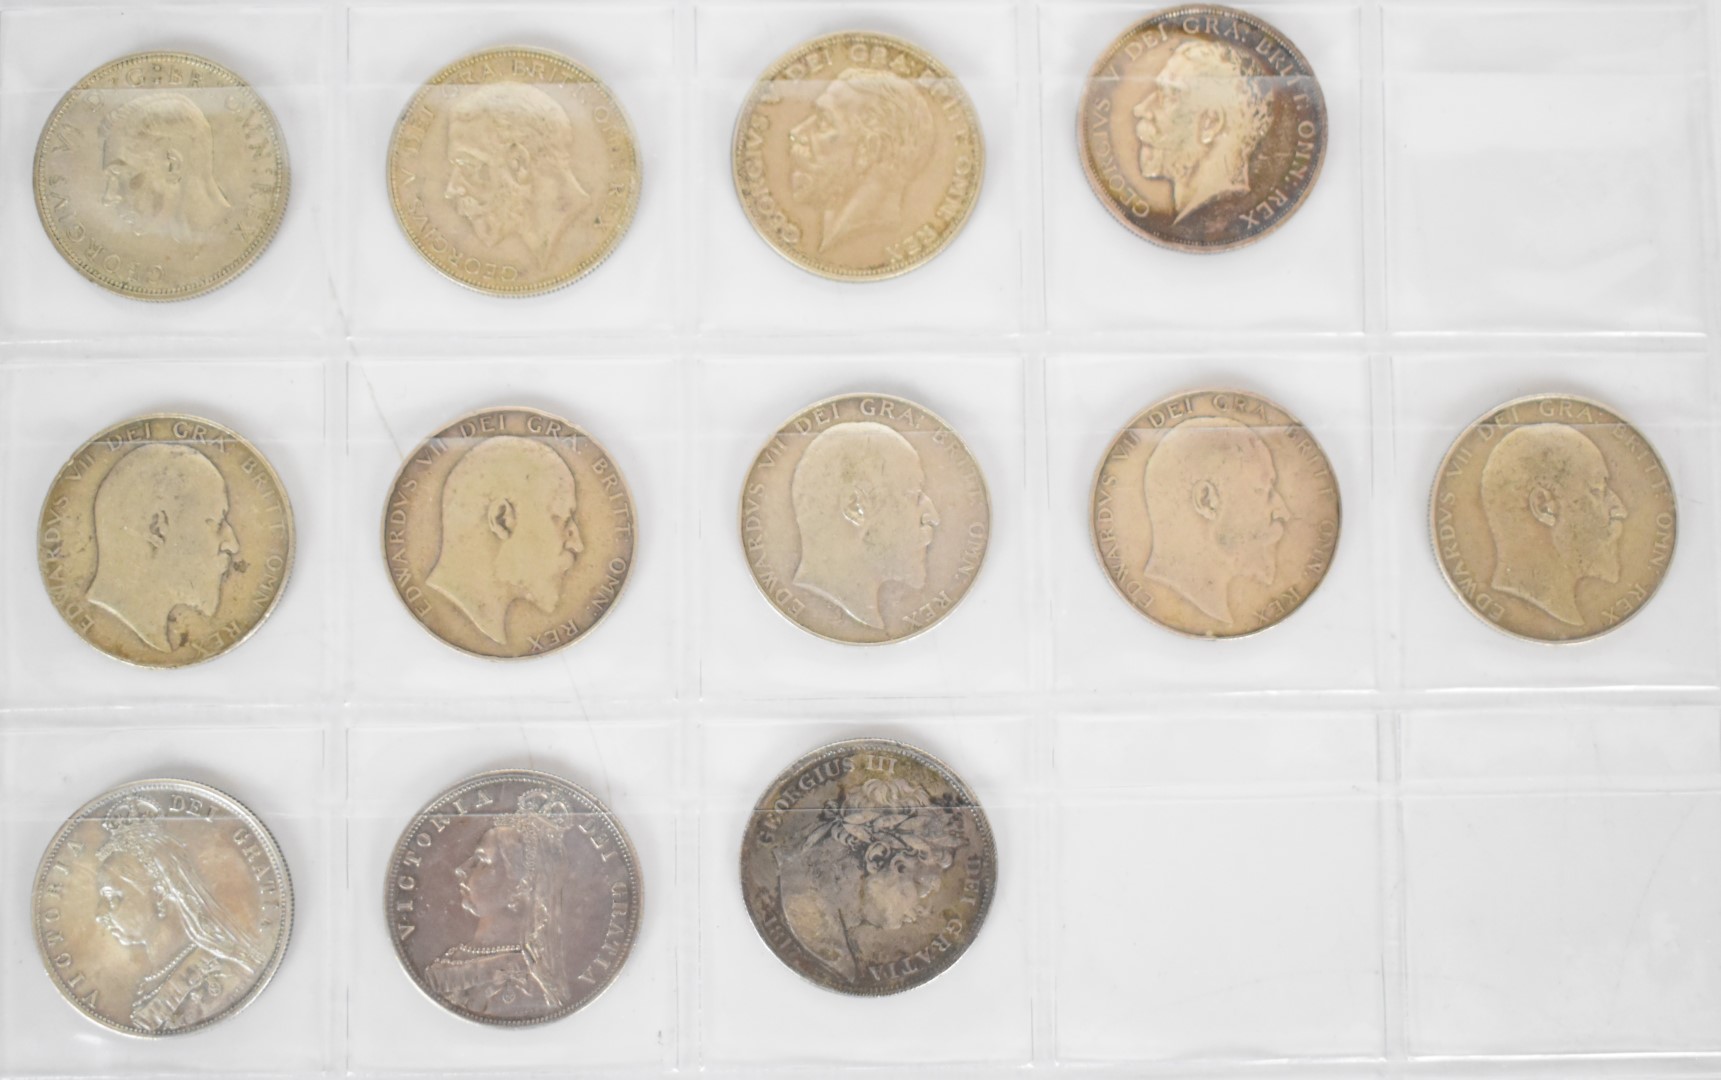 Amateur coin collection of mainly UK Victorian / Edwardian silver coinage and two George IV coins - Image 4 of 9